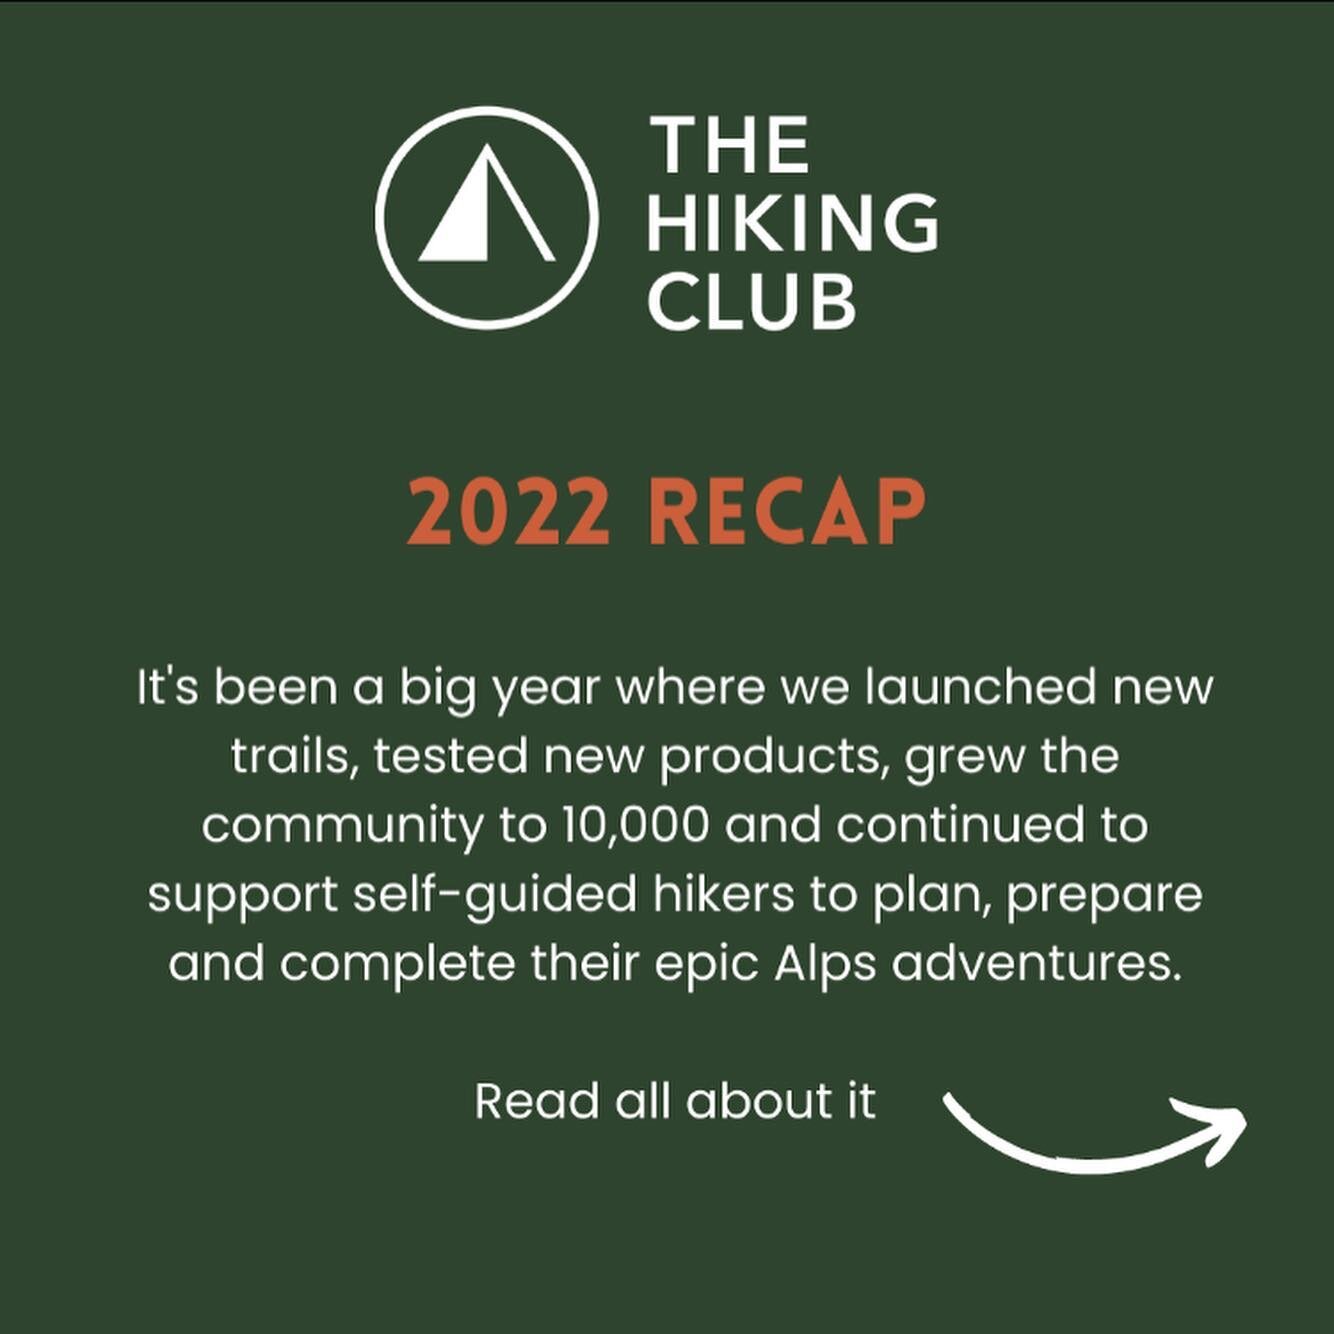 Is it really 2023 already? 😲 

🗓️ 2022 was a big year. We launched new trails, tested new products, grew the community to 10,000, and continued to support self-guided hikers to plan, prepare and complete their epic Alps adventures. Phew, time for a